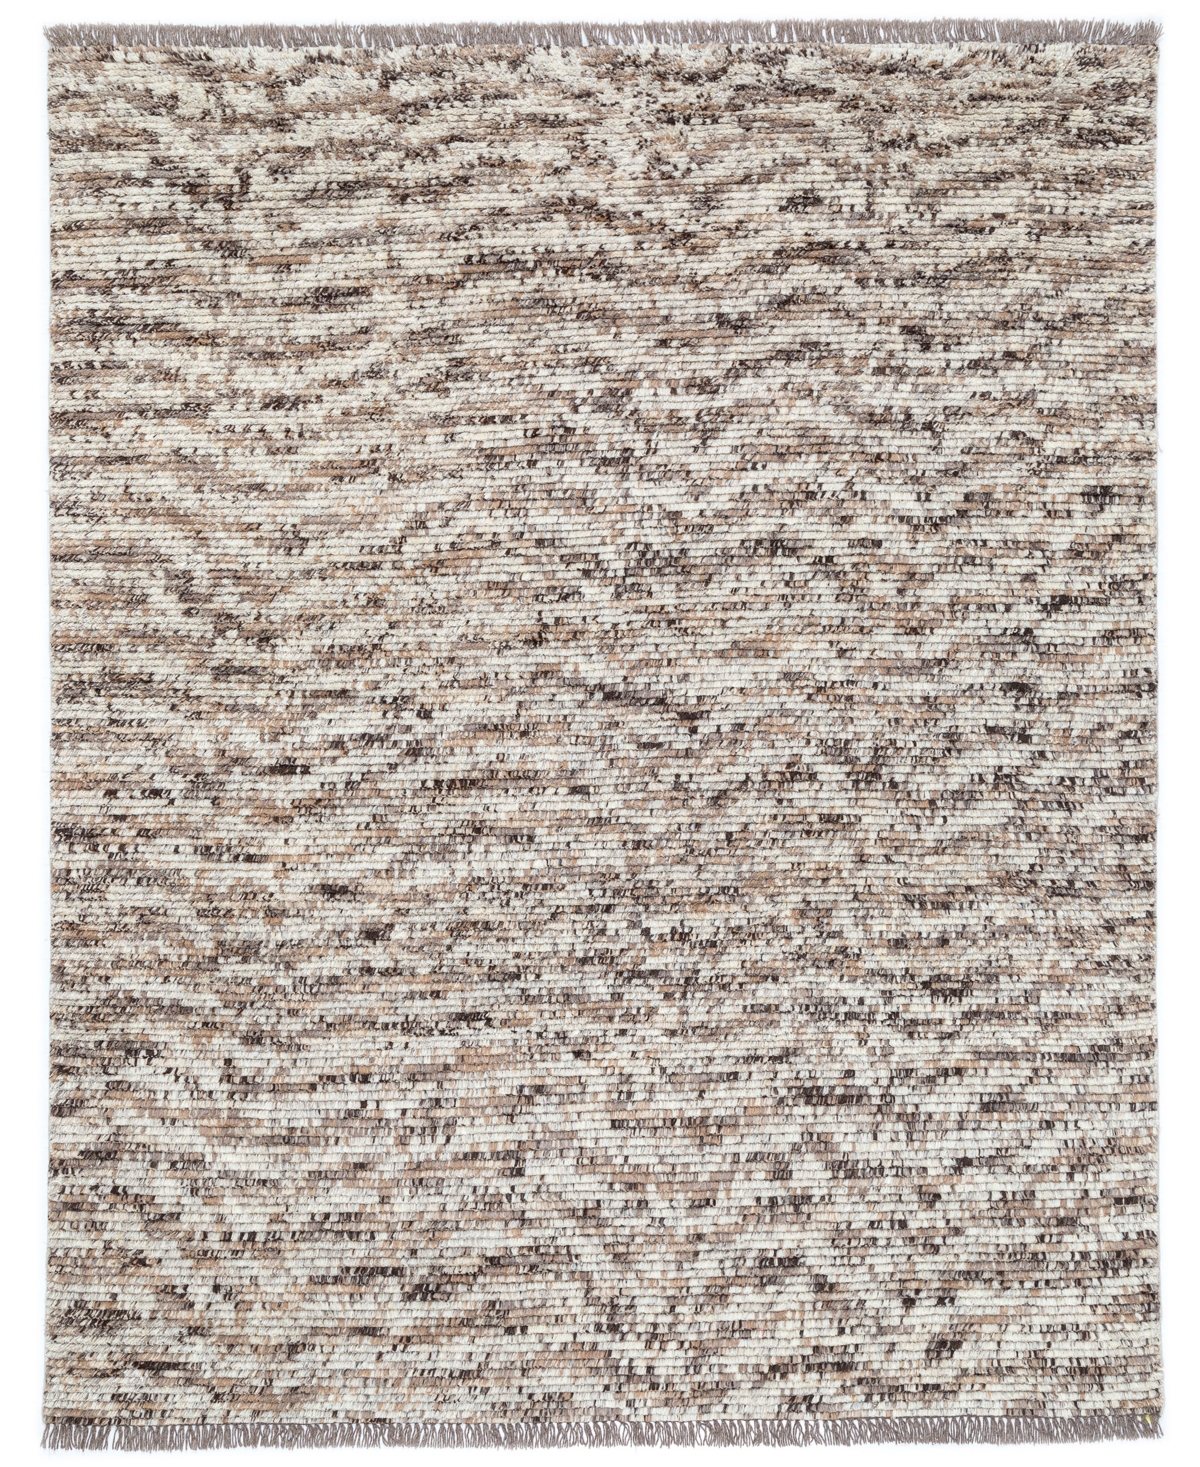 NuStory Newell Turner Wild Feathers 7'6in x 9'6in Area Rug - Brown